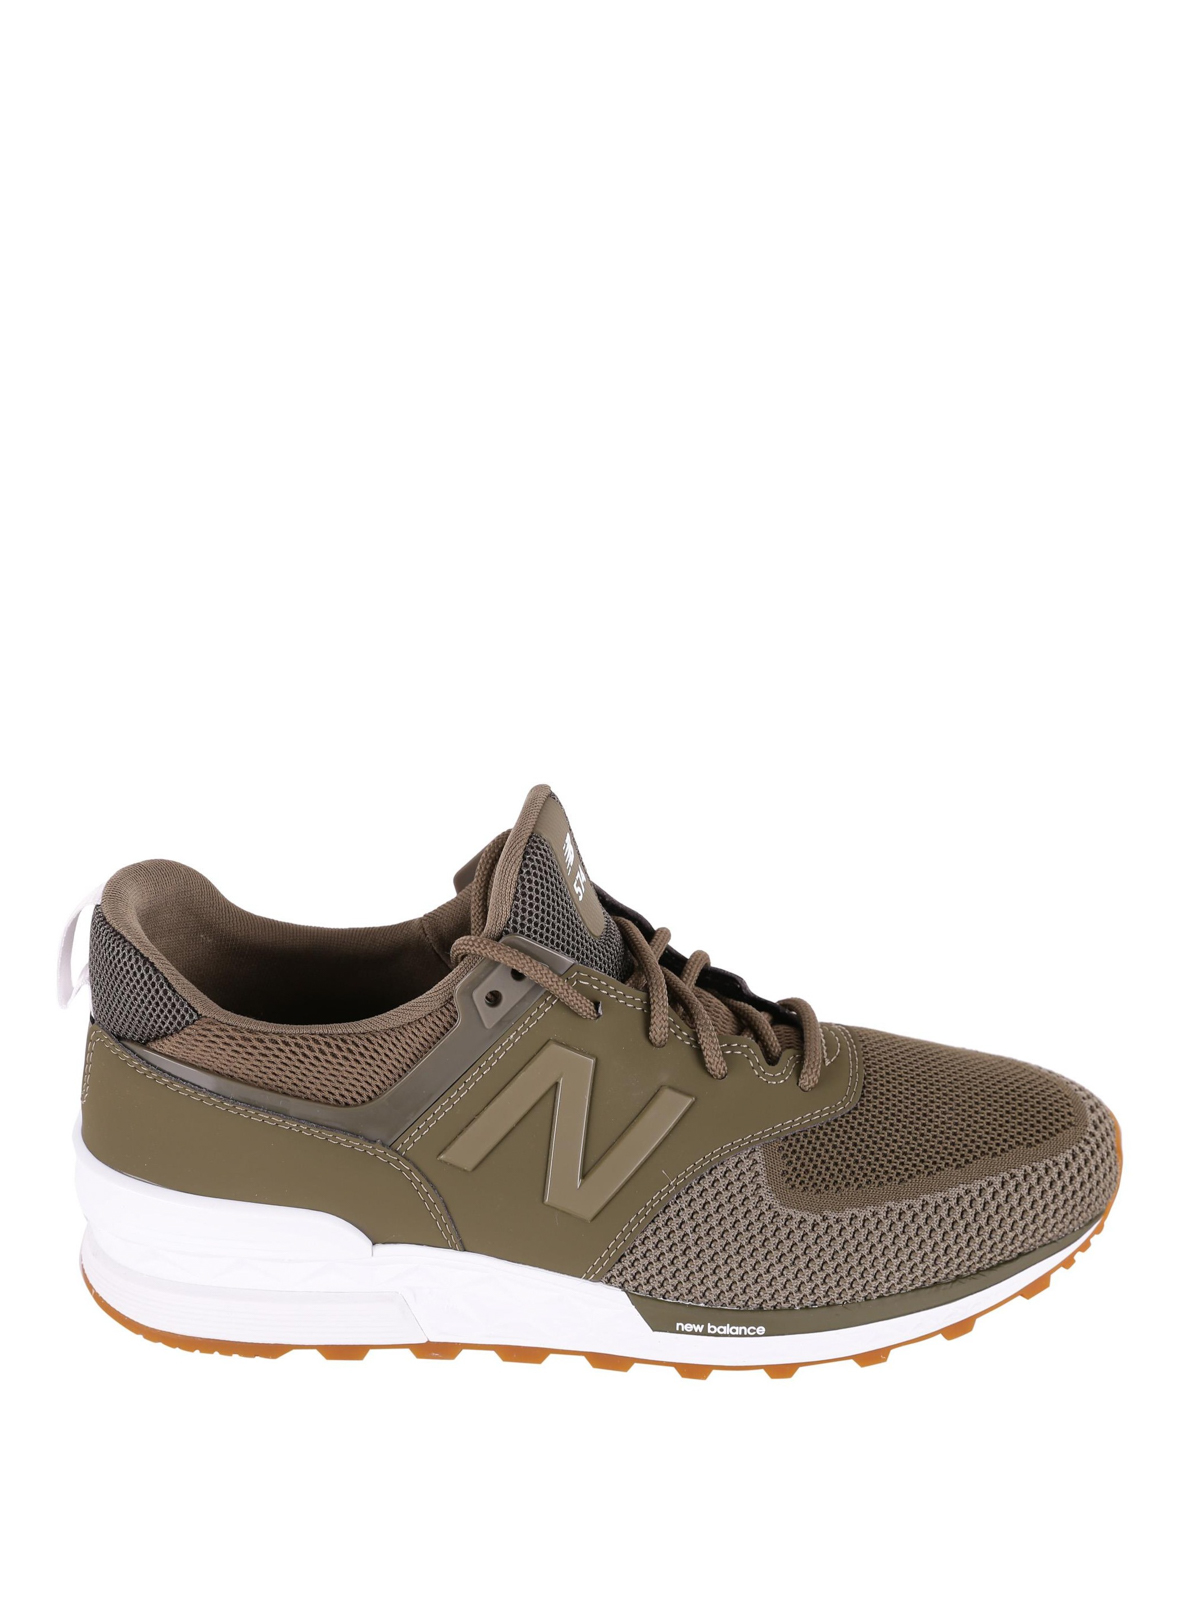 army green new balance shoes